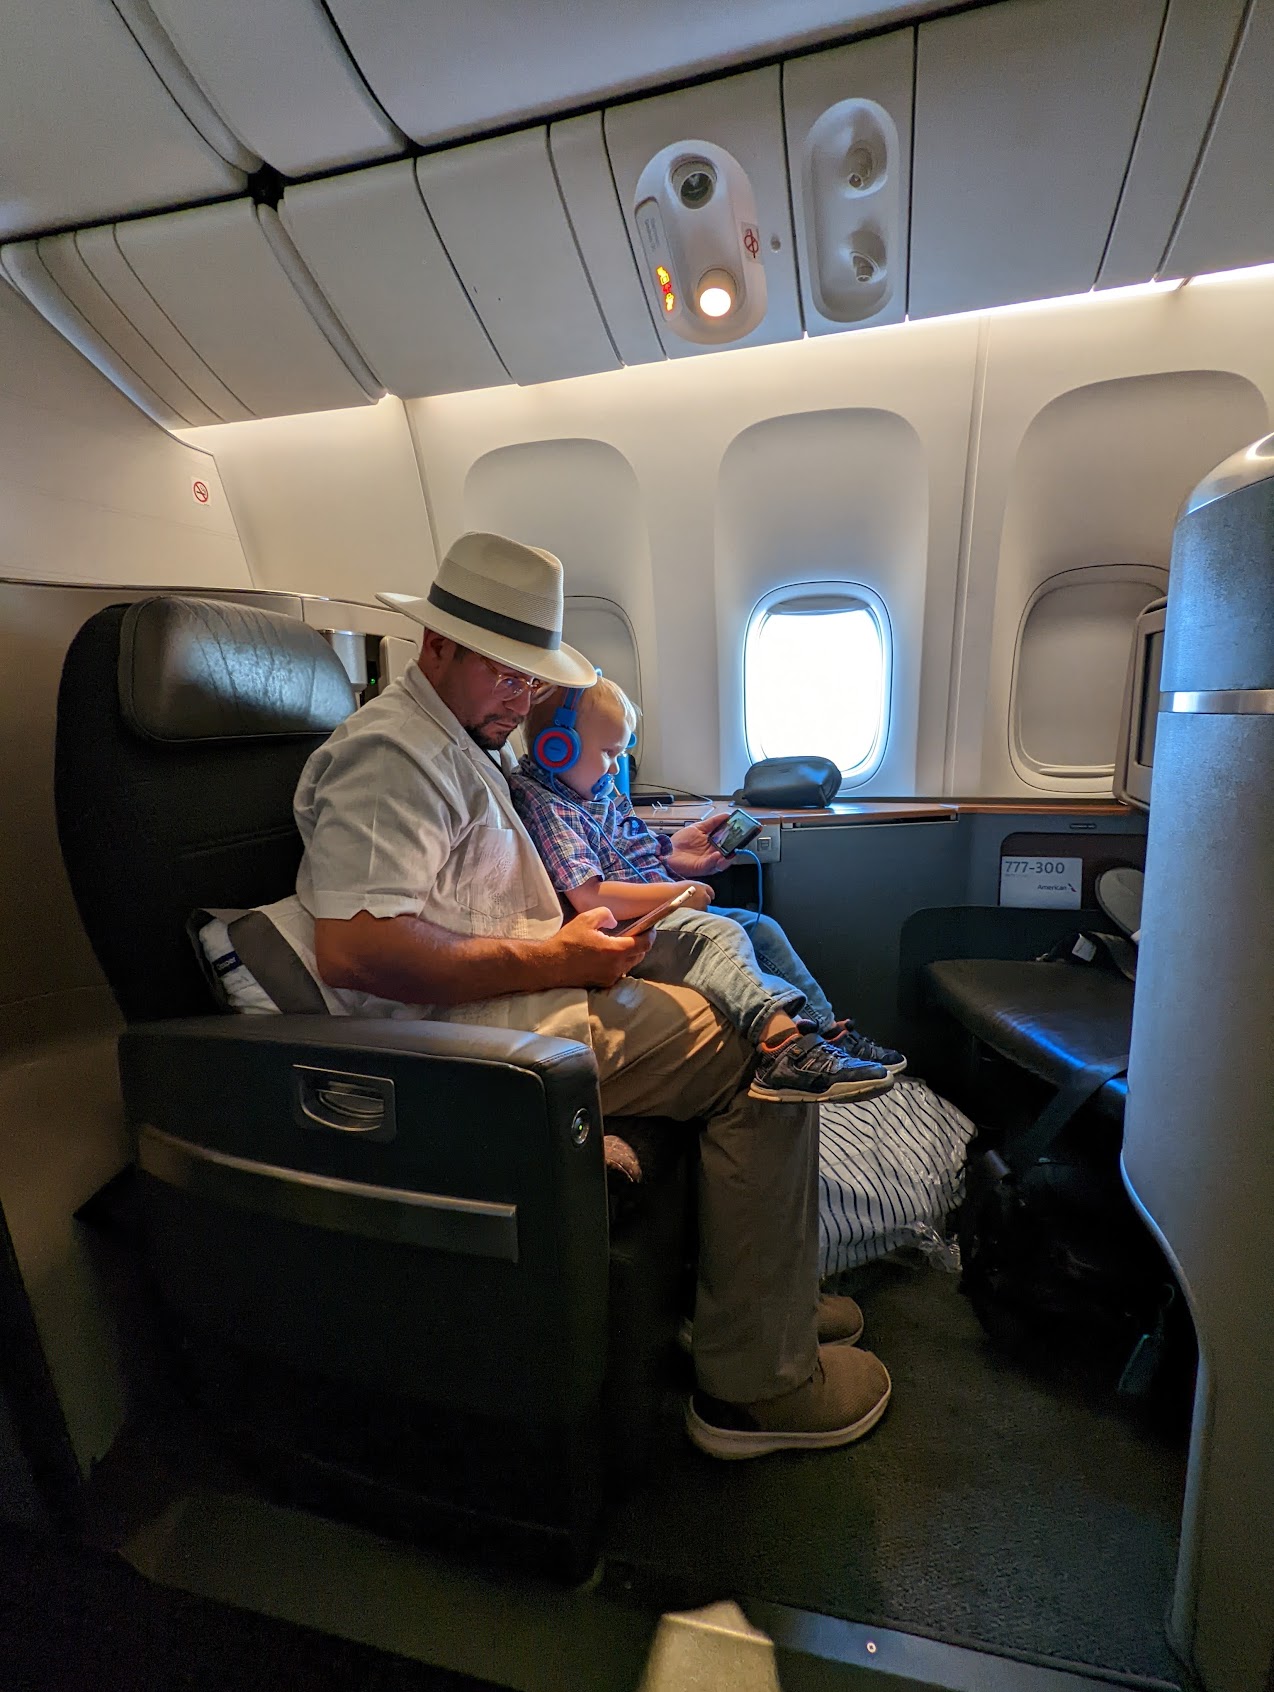 a man and baby sitting on an airplane